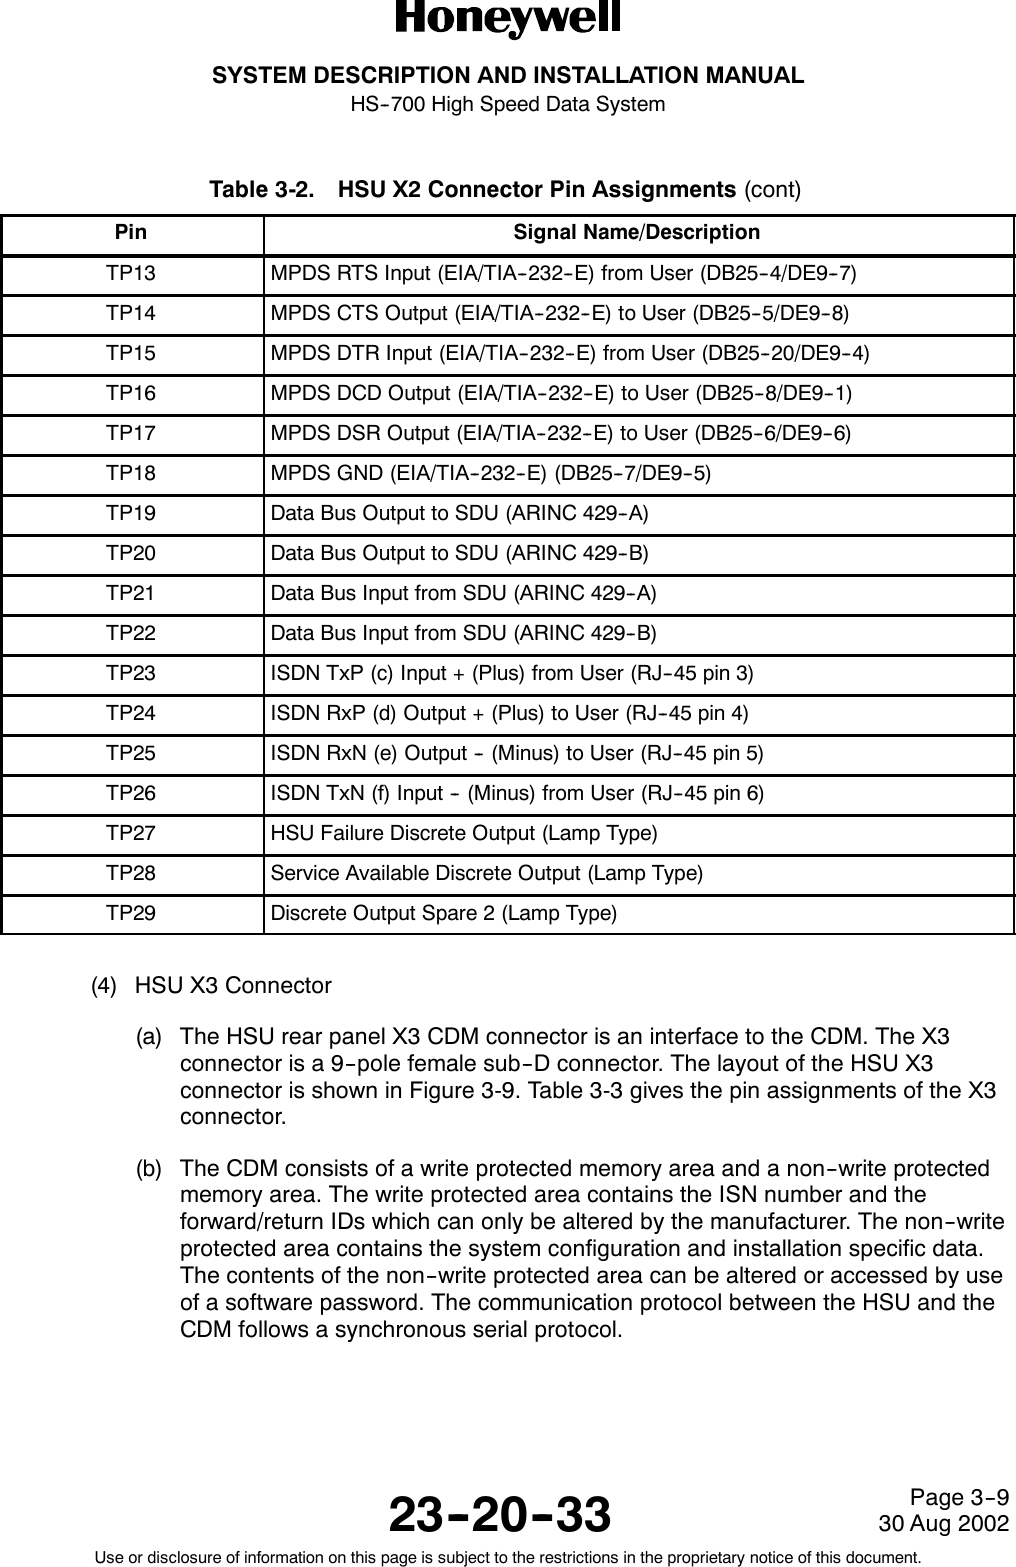 SYSTEM DESCRIPTION AND INSTALLATION MANUALHS--700 High Speed Data System23--20--3330 Aug 2002Use or disclosure of information on this page is subject to the restrictions in the proprietary notice of this document.Page 3--9Table 3-2. HSU X2 Connector Pin Assignments (cont)Pin Signal Name/DescriptionTP13 MPDS RTS Input (EIA/TIA--232--E) from User (DB25--4/DE9--7)TP14 MPDS CTS Output (EIA/TIA--232--E) to User (DB25--5/DE9--8)TP15 MPDS DTR Input (EIA/TIA--232--E) from User (DB25--20/DE9--4)TP16 MPDS DCD Output (EIA/TIA--232--E) to User (DB25--8/DE9--1)TP17 MPDS DSR Output (EIA/TIA--232--E) to User (DB25--6/DE9--6)TP18 MPDS GND (EIA/TIA--232--E) (DB25--7/DE9--5)TP19 Data Bus Output to SDU (ARINC 429--A)TP20 Data Bus Output to SDU (ARINC 429--B)TP21 Data Bus Input from SDU (ARINC 429--A)TP22 Data Bus Input from SDU (ARINC 429--B)TP23 ISDN TxP (c) Input + (Plus) from User (RJ--45 pin 3)TP24 ISDN RxP (d) Output + (Plus) to User (RJ--45 pin 4)TP25 ISDN RxN (e) Output -- (Minus) to User (RJ--45 pin 5)TP26 ISDN TxN (f) Input -- (Minus) from User (RJ--45 pin 6)TP27 HSU Failure Discrete Output (Lamp Type)TP28 Service Available Discrete Output (Lamp Type)TP29 Discrete Output Spare 2 (Lamp Type)(4) HSU X3 Connector(a) The HSU rear panel X3 CDM connector is an interface to the CDM. The X3connector is a 9--pole female sub--D connector. The layout of the HSU X3connector is shown in Figure 3-9. Table 3-3 gives the pin assignments of the X3connector.(b) The CDM consists of a write protected memory area and a non--write protectedmemory area. The write protected area contains the ISN number and theforward/return IDs which can only be altered by the manufacturer. The non--writeprotected area contains the system configuration and installation specific data.The contents of the non--write protected area can be altered or accessed by useof a software password. The communication protocol between the HSU and theCDM follows a synchronous serial protocol.